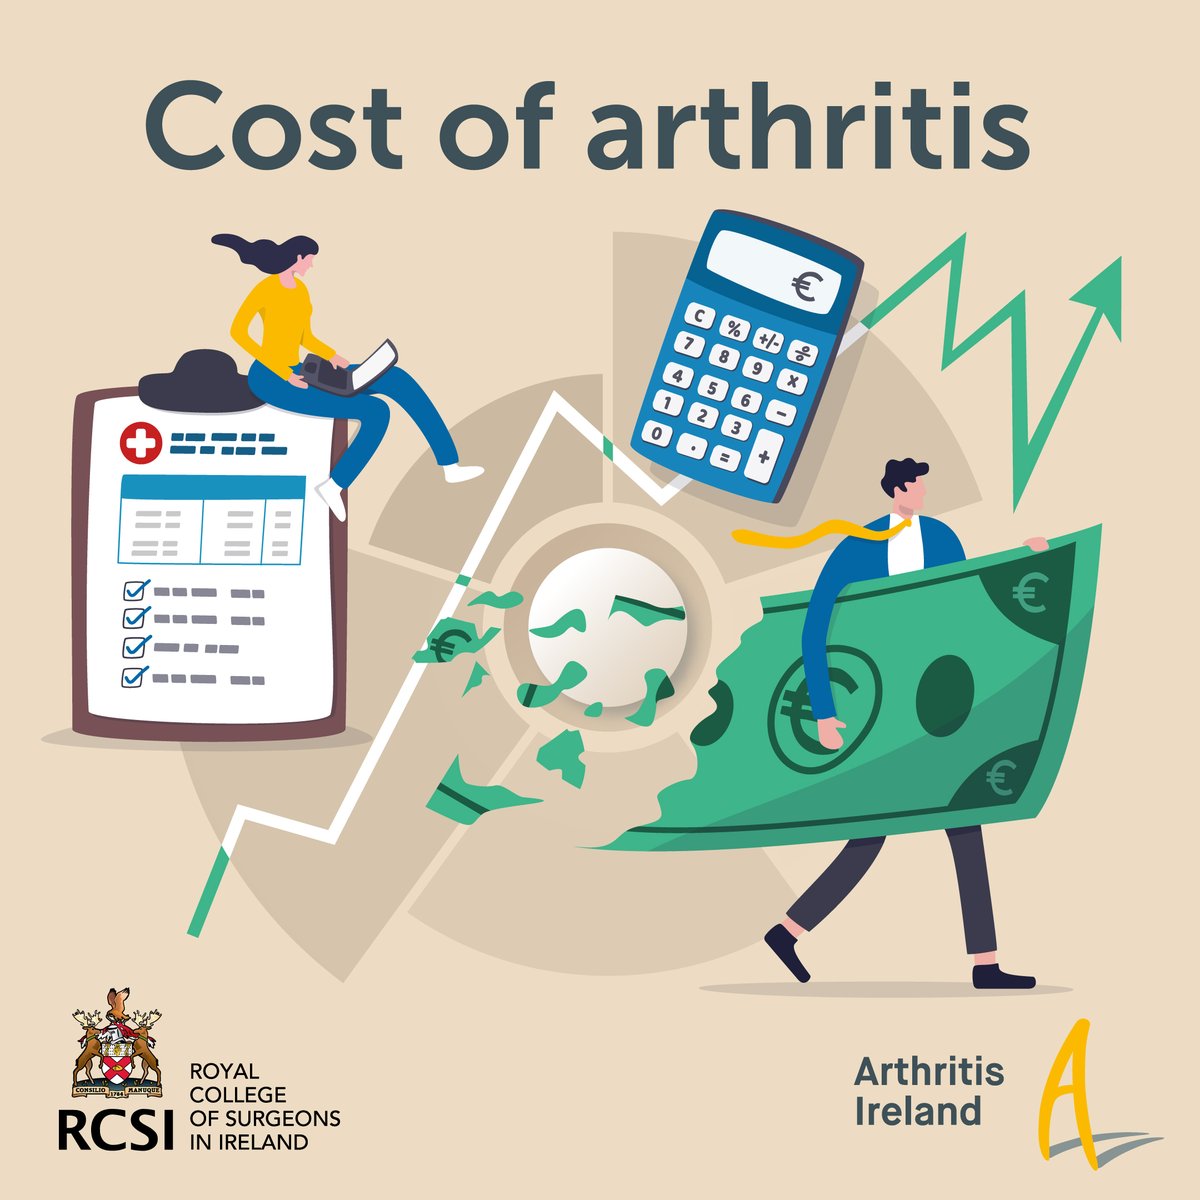 Arthritis Ireland is carrying out a voluntary & anonymous research study to understand the individual costs related to arthritis management amongst a sample of adults with the condition. If you wish to take part complete the survey using this link: smartsurvey.co.uk/s/4P0O24/